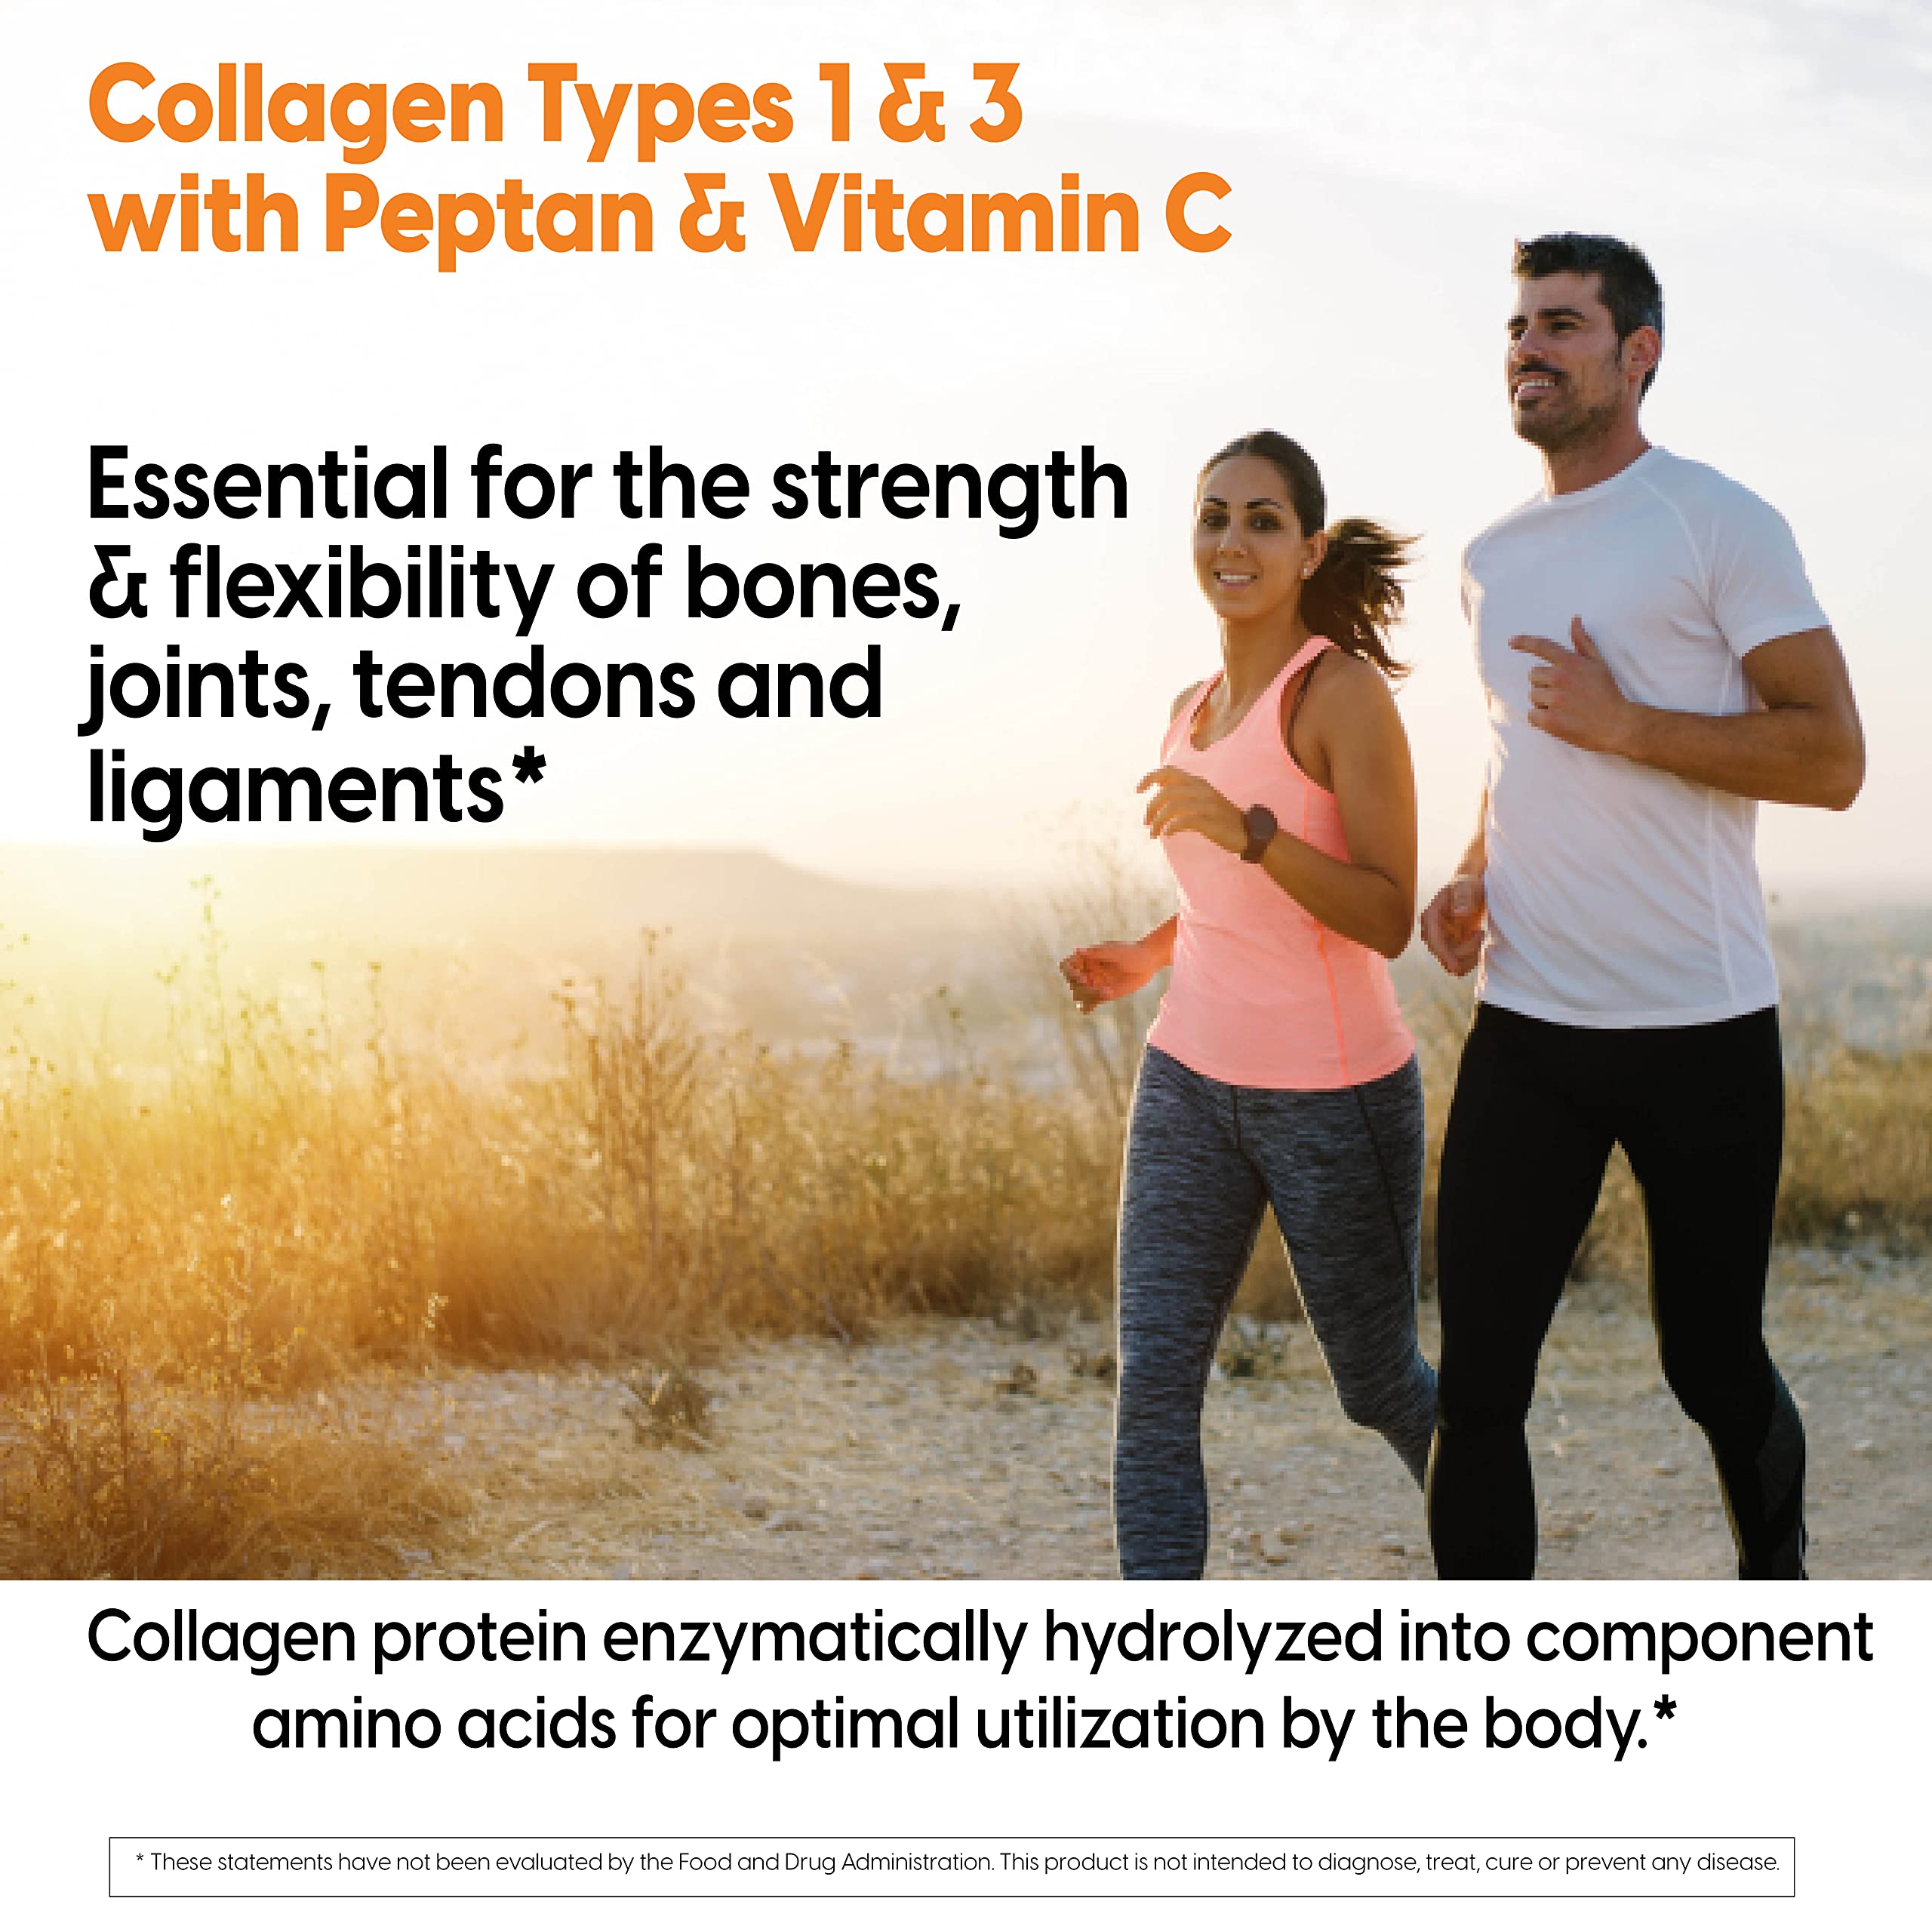 Doctor's Best Collagen Types 1 & 3 with Vitamin C, Non-GMO, Gluten Free, Soy Free, Supports Hair, Skin, Nails, Tendons & Bones, 500 mg, 240 Caps (DRB-00263)